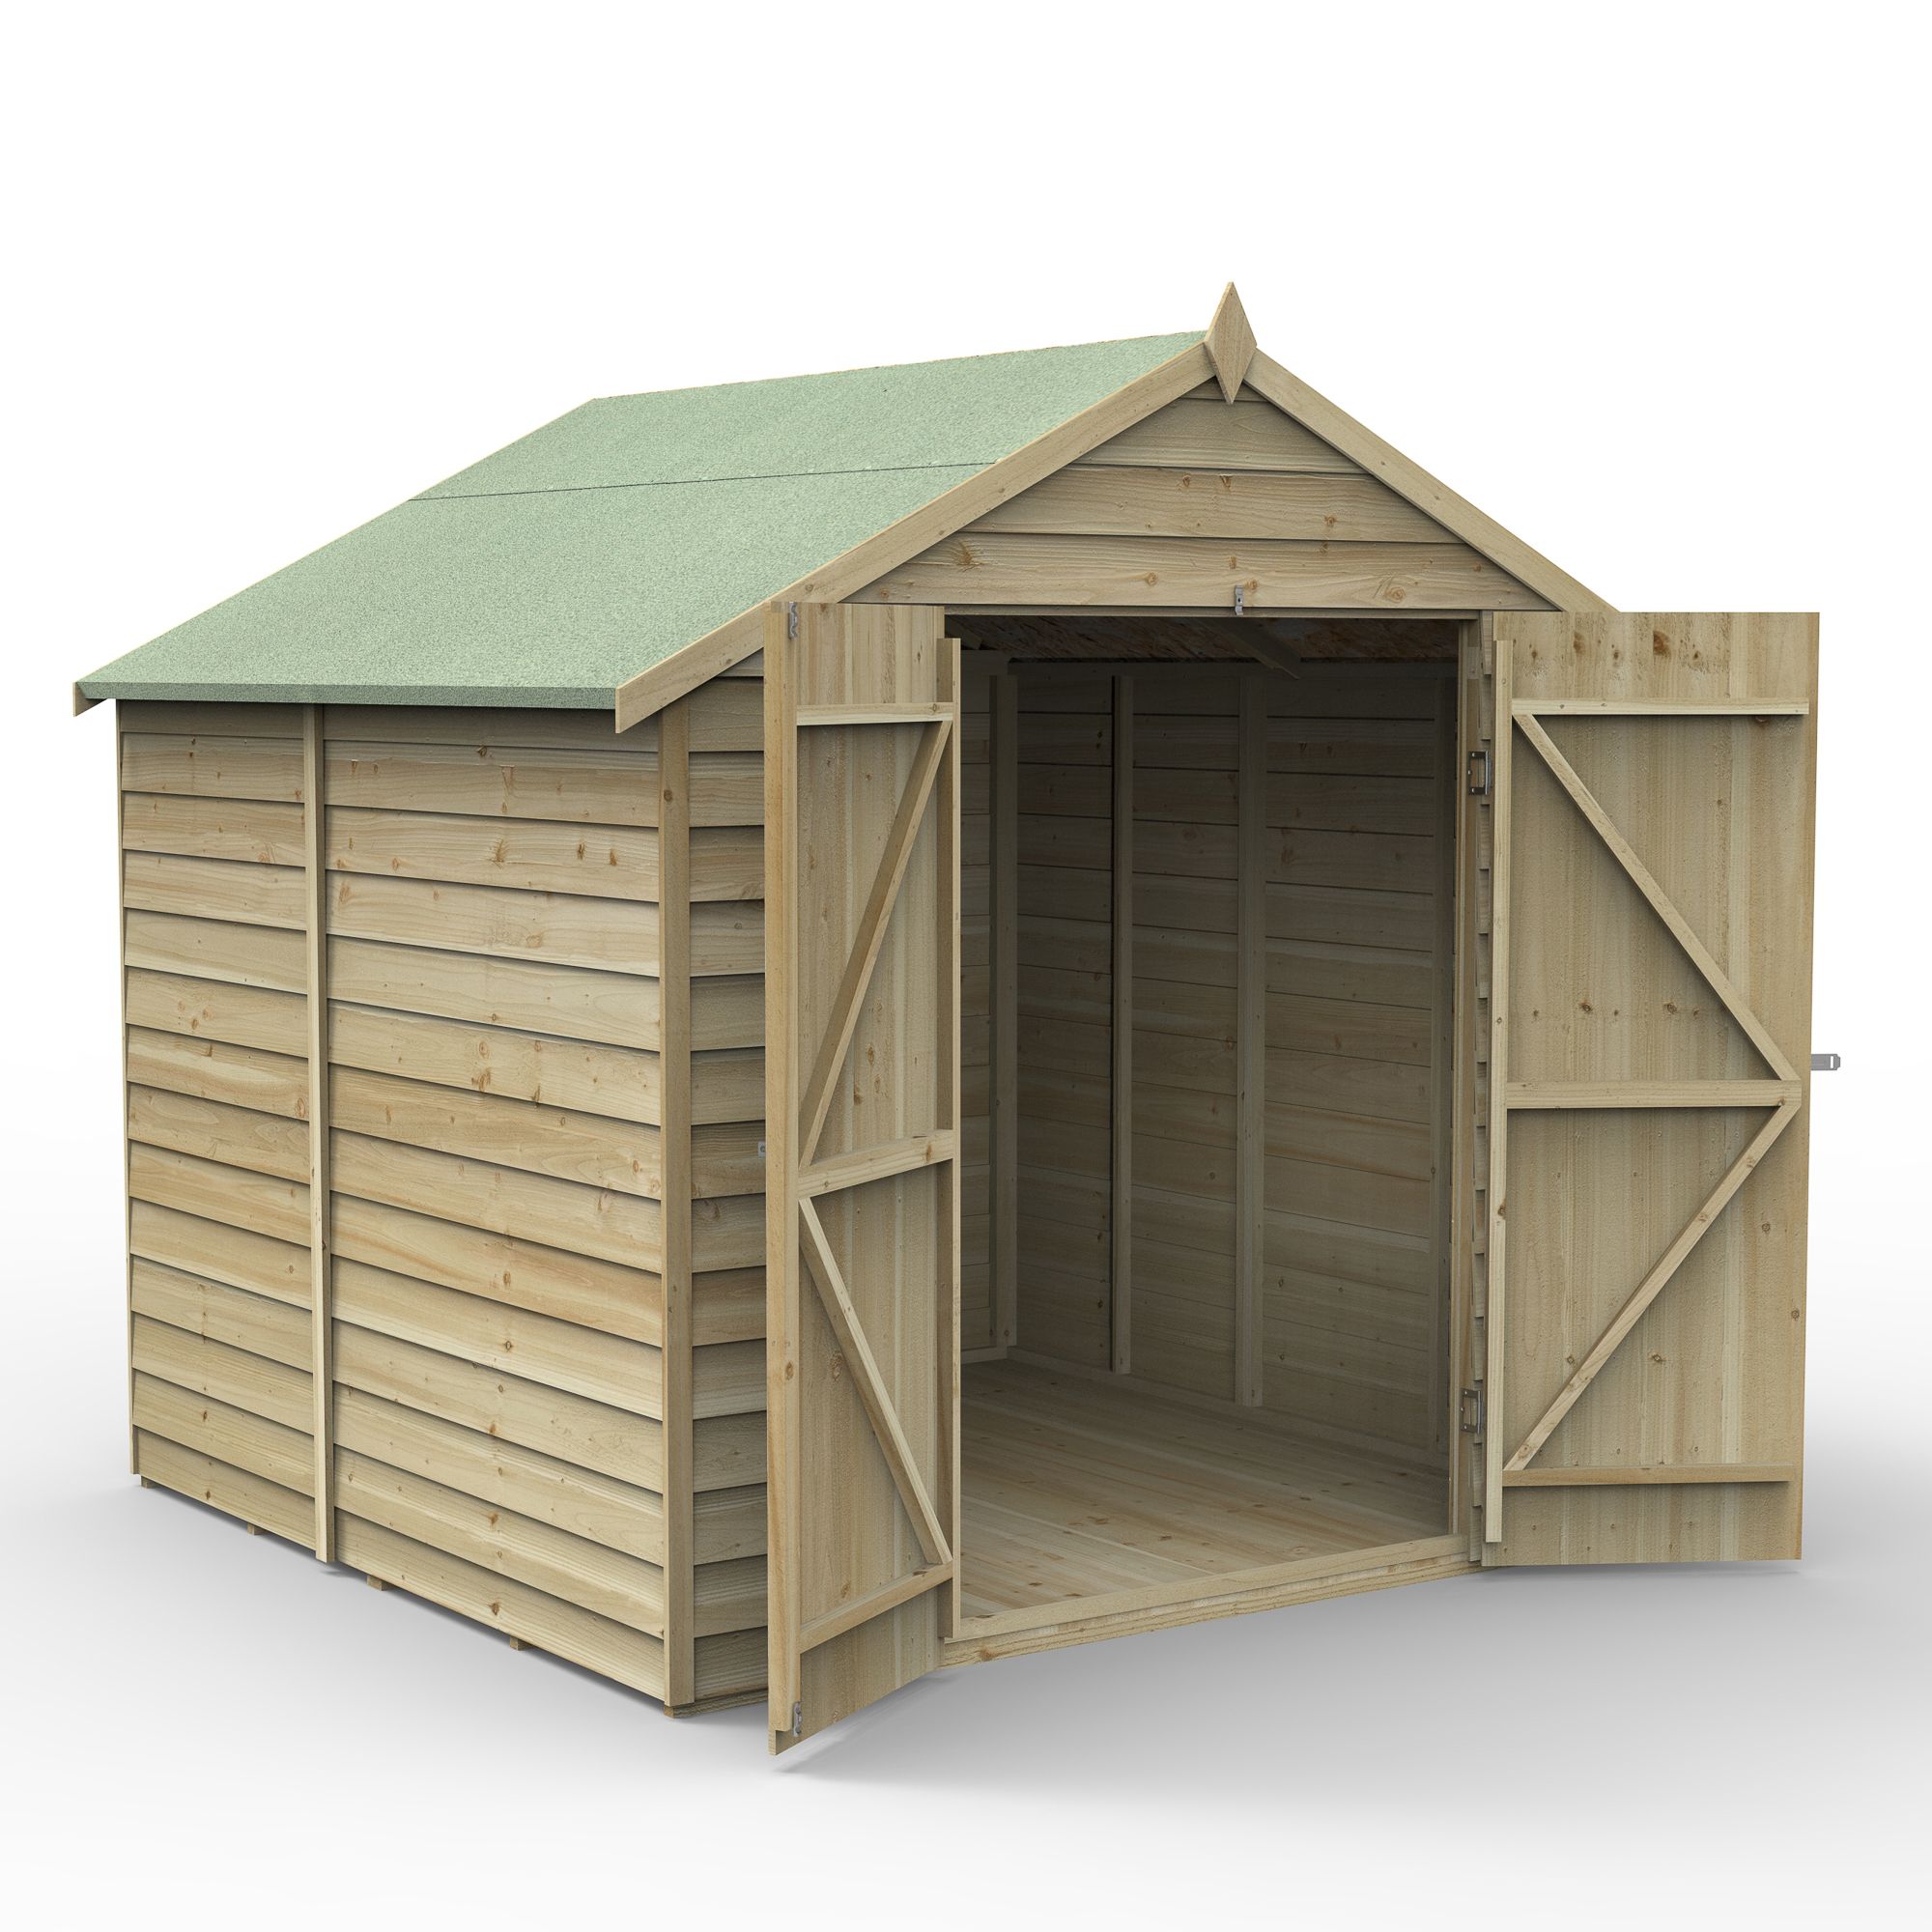 Forest Garden 7X7 Ft Apex Overlap Wooden Shed With Floor